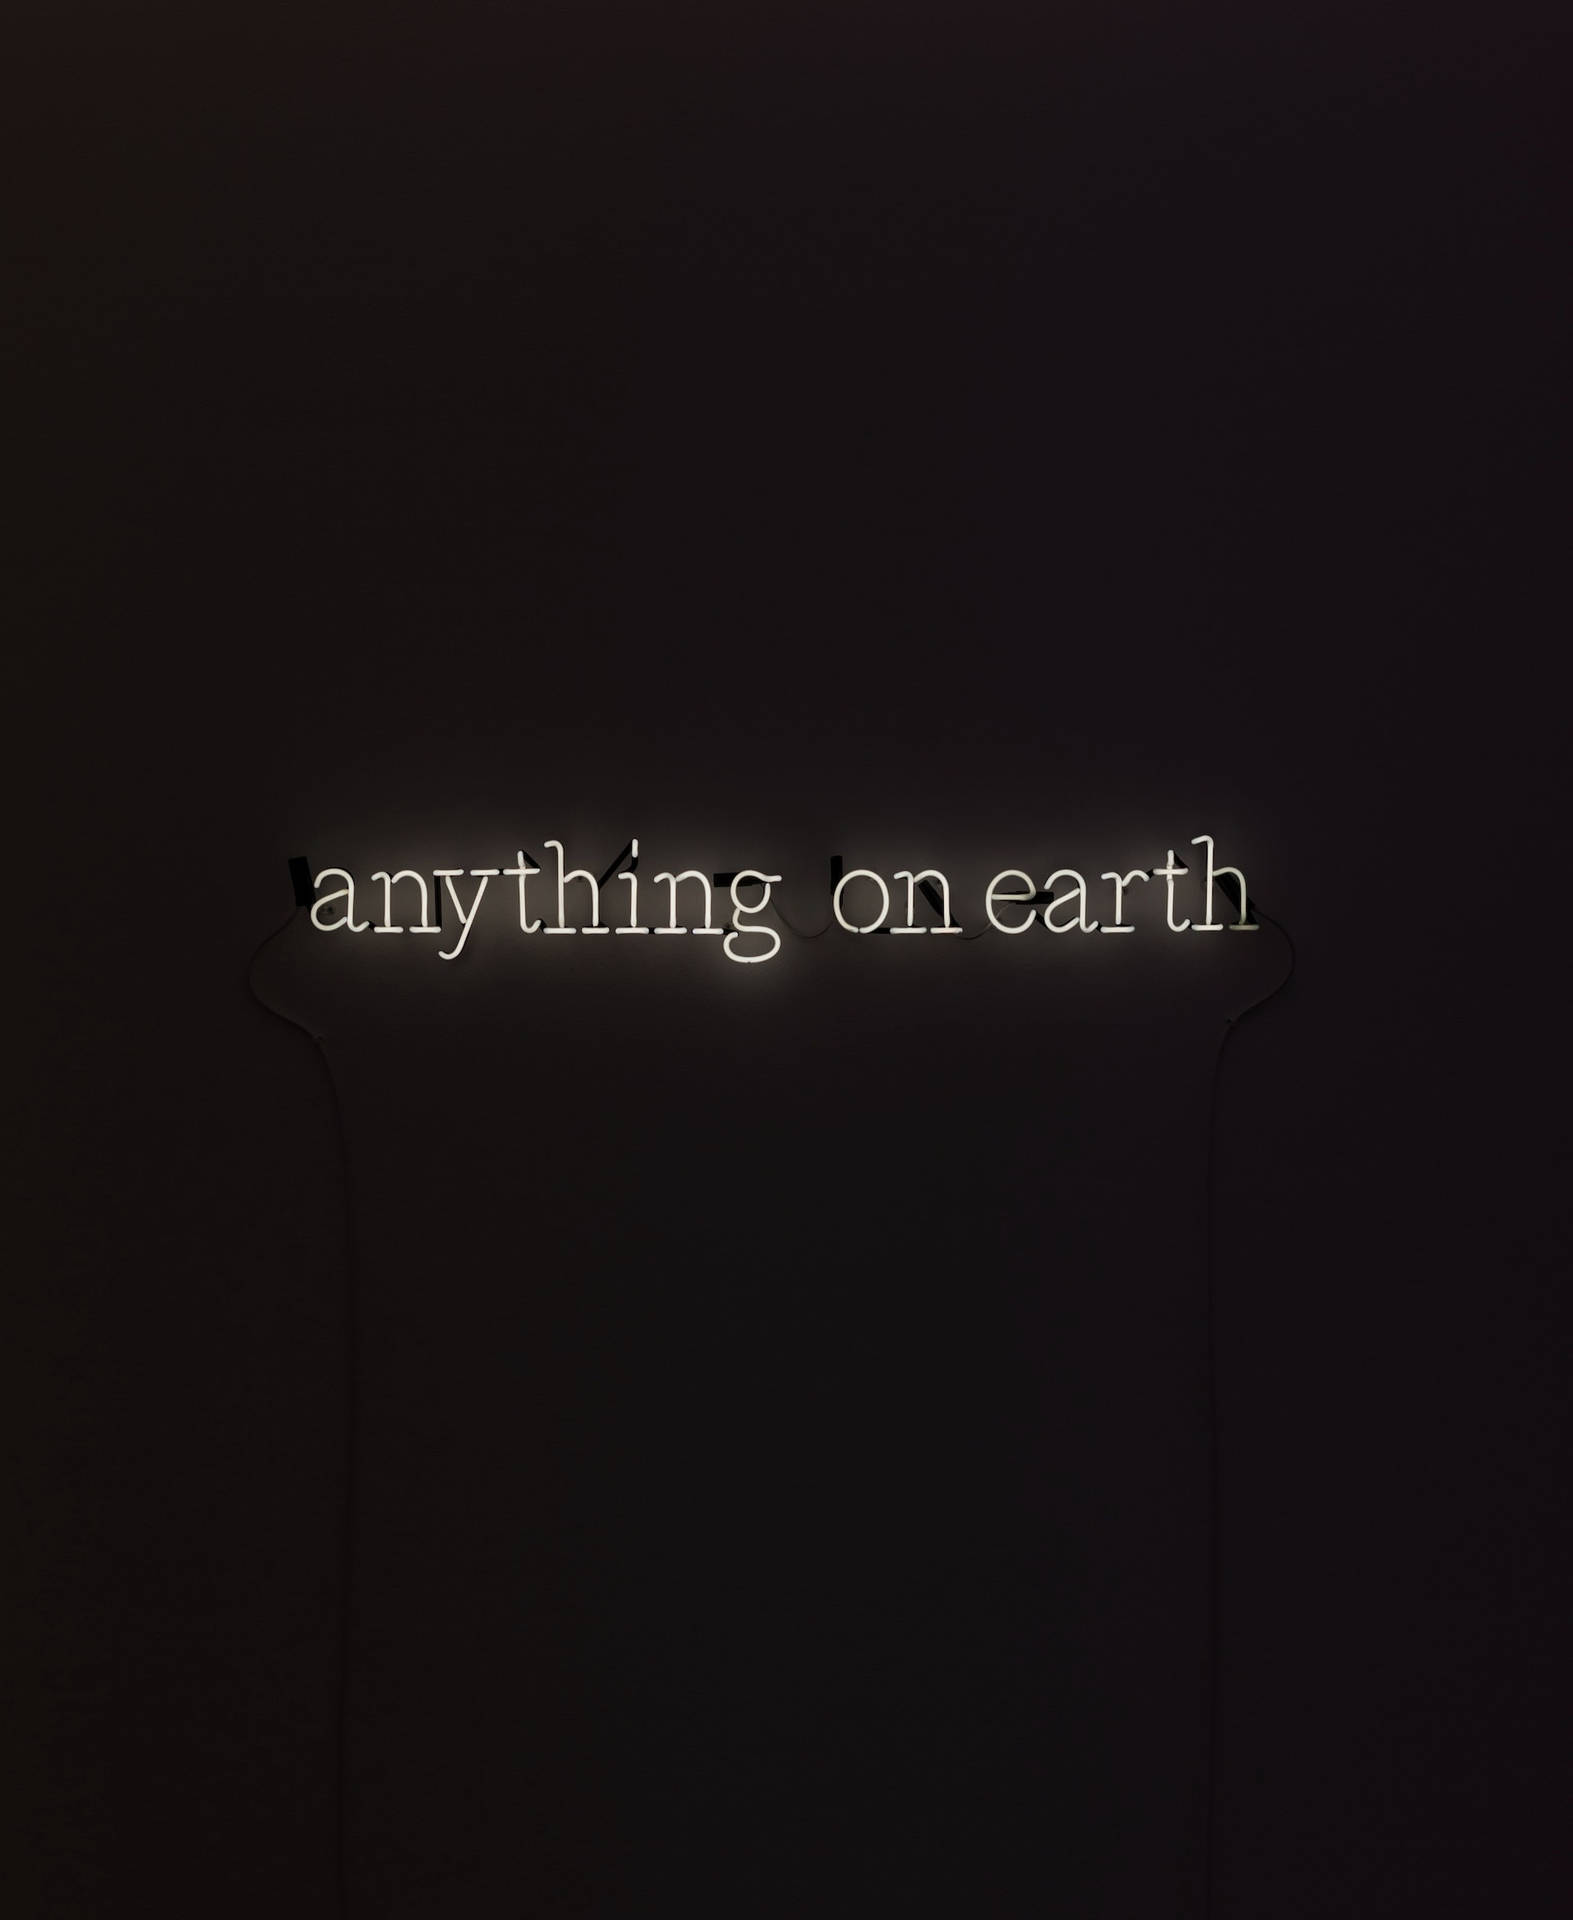 Anything On Earth Black Phone Wallpaper